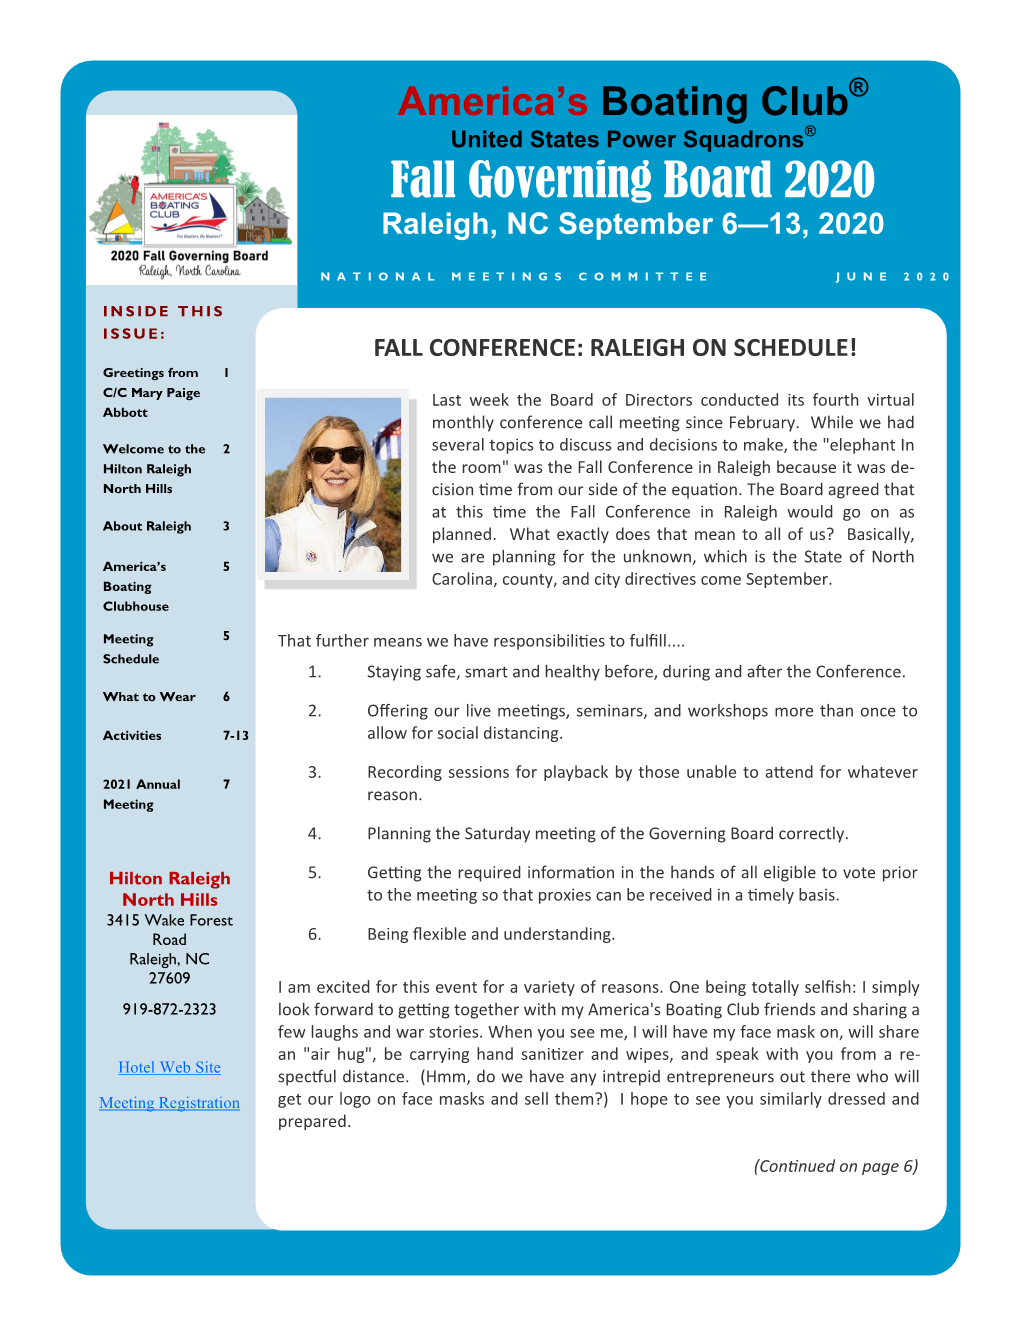 Fall Governing Board 2020 Raleigh, NC September 6—13, 2020